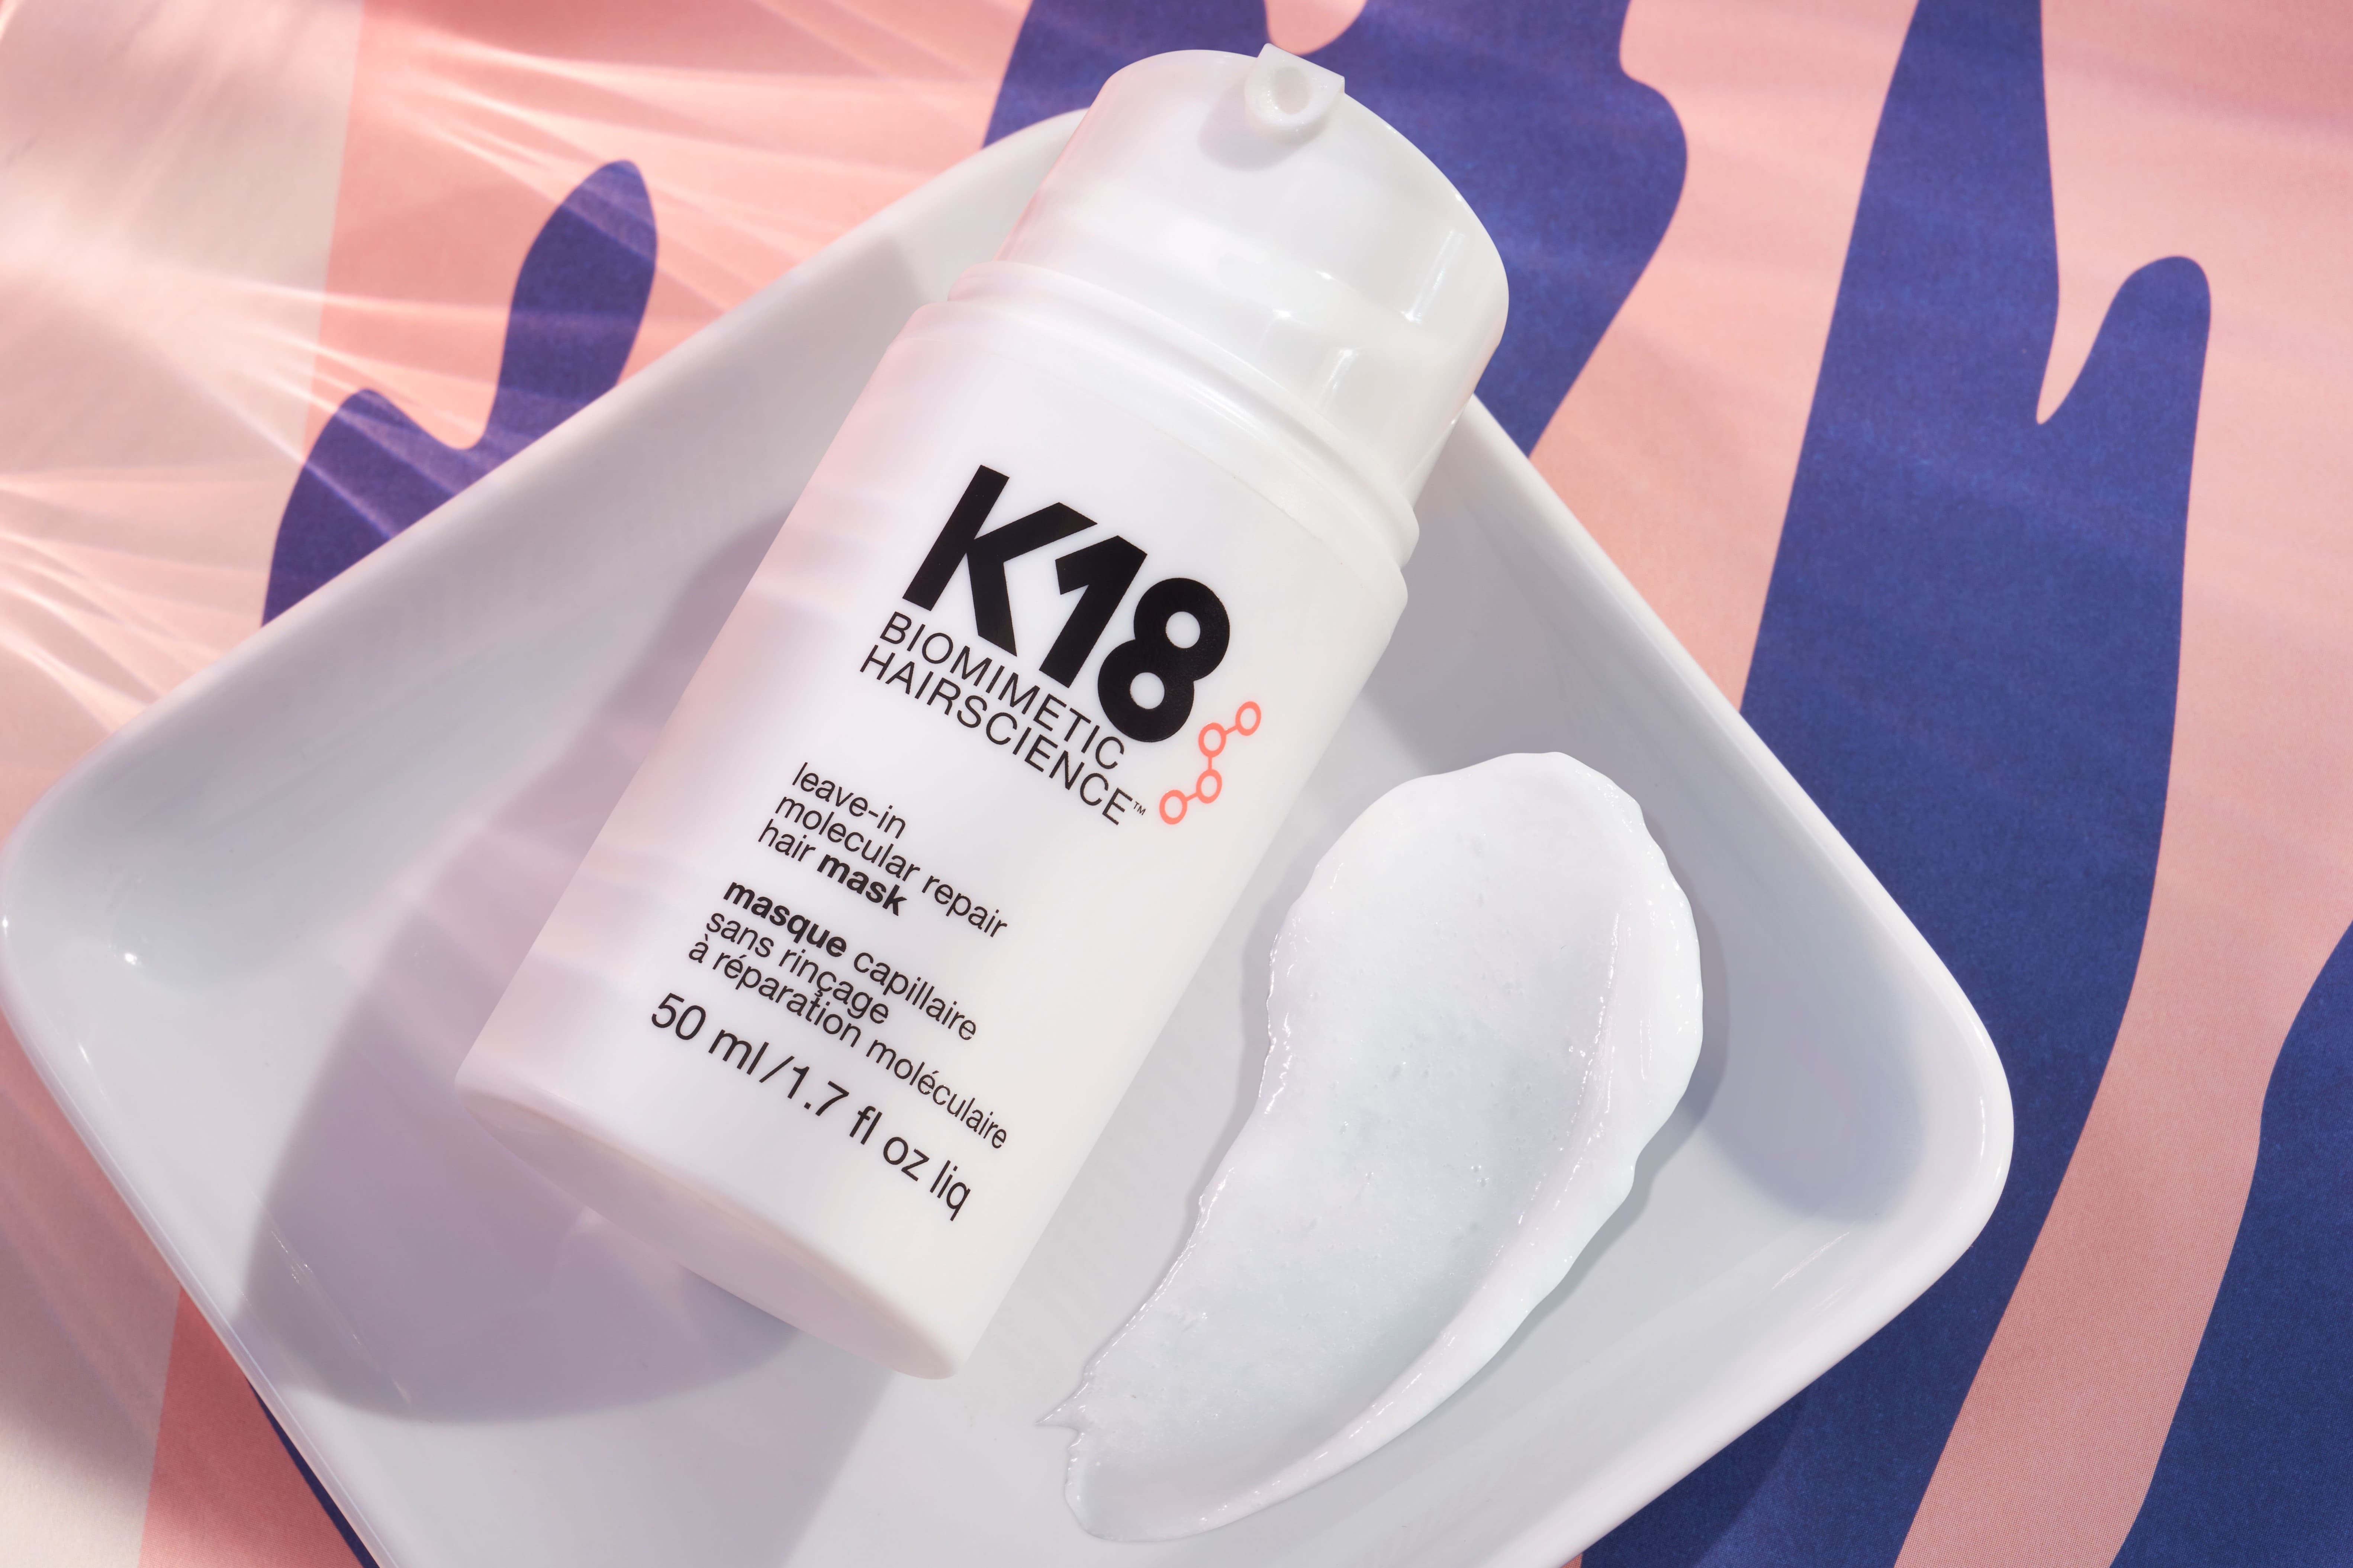 K18 Hair Mask Review | Space NK